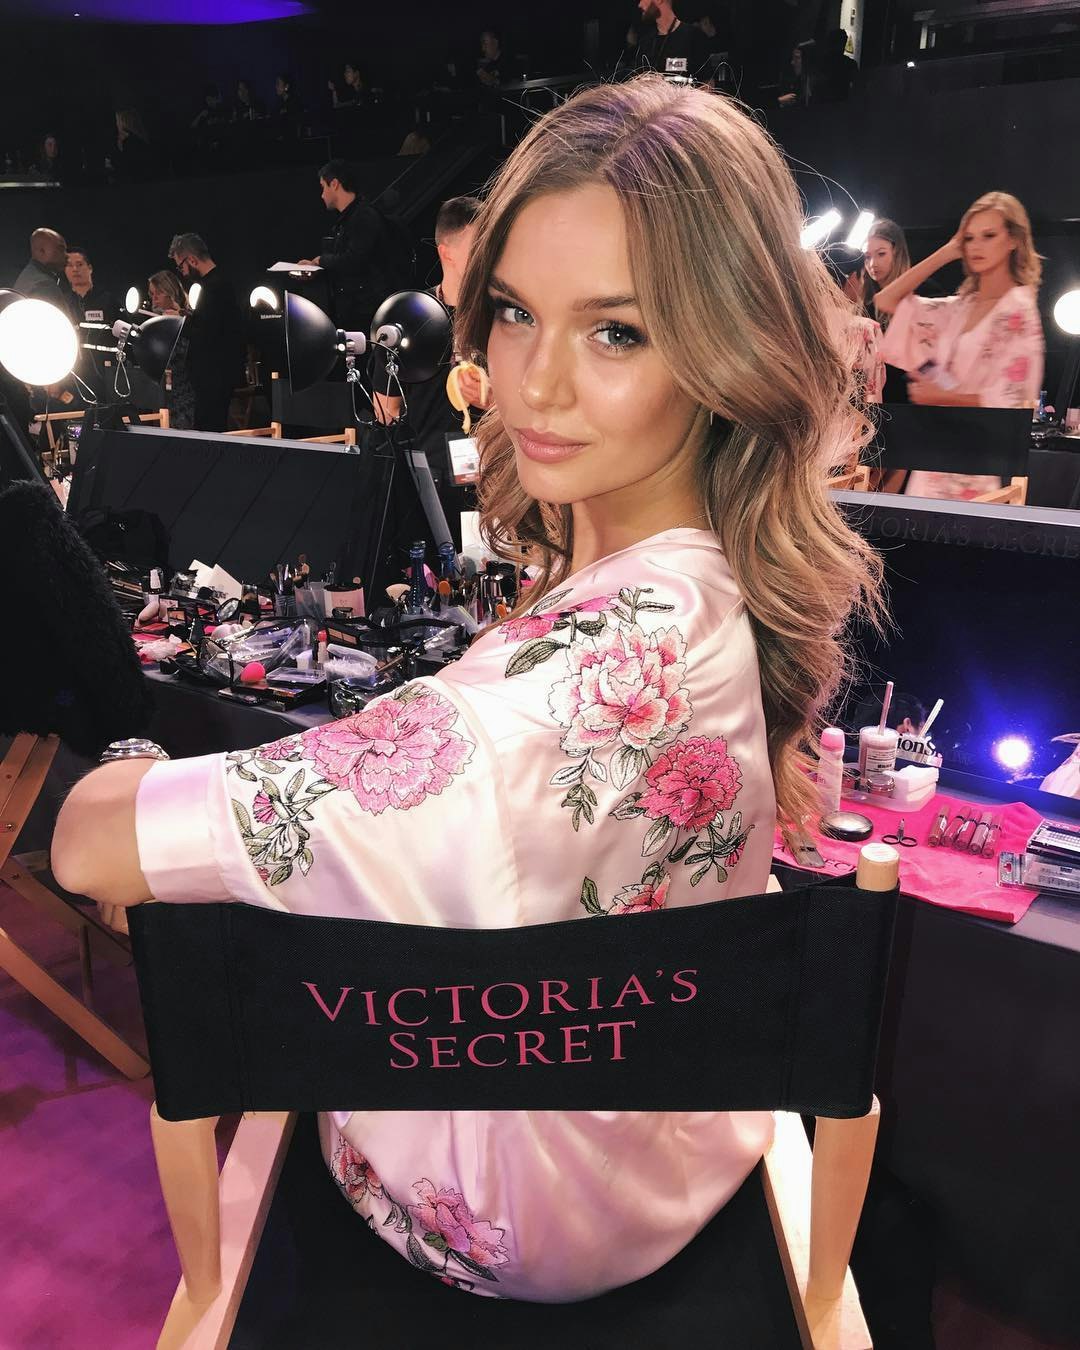 How All the Victoria's Secret Angels Celebrated Thanksgiving